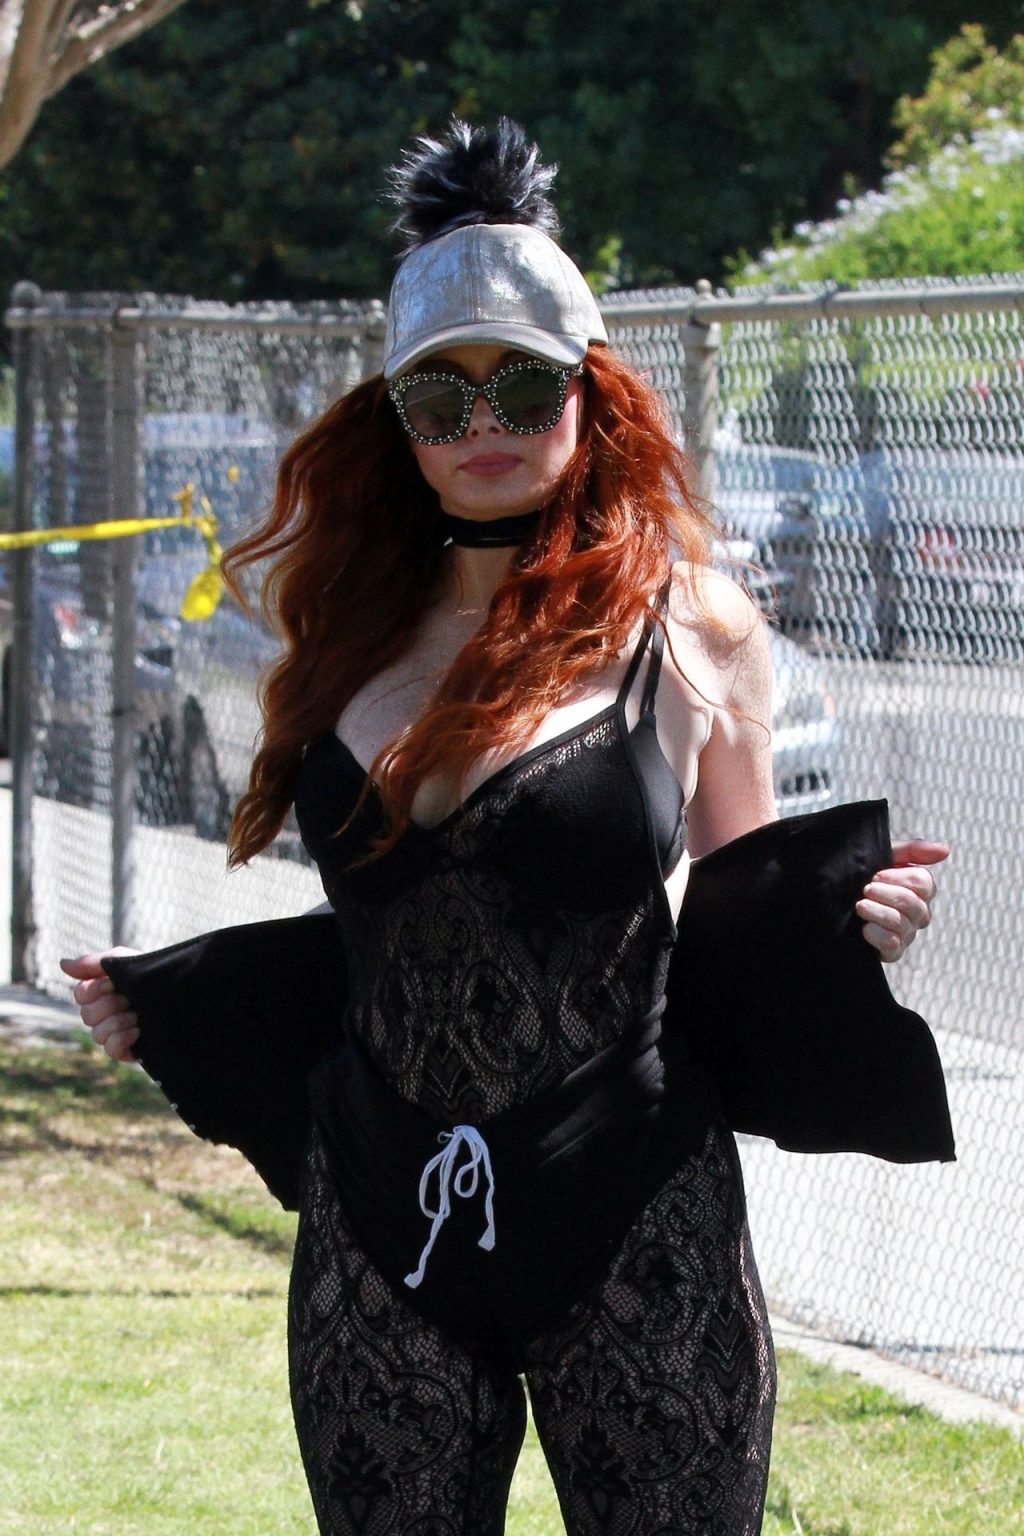 Phoebe Price Poses for Cameras Ahead of a Tennis Match (62 Photos)